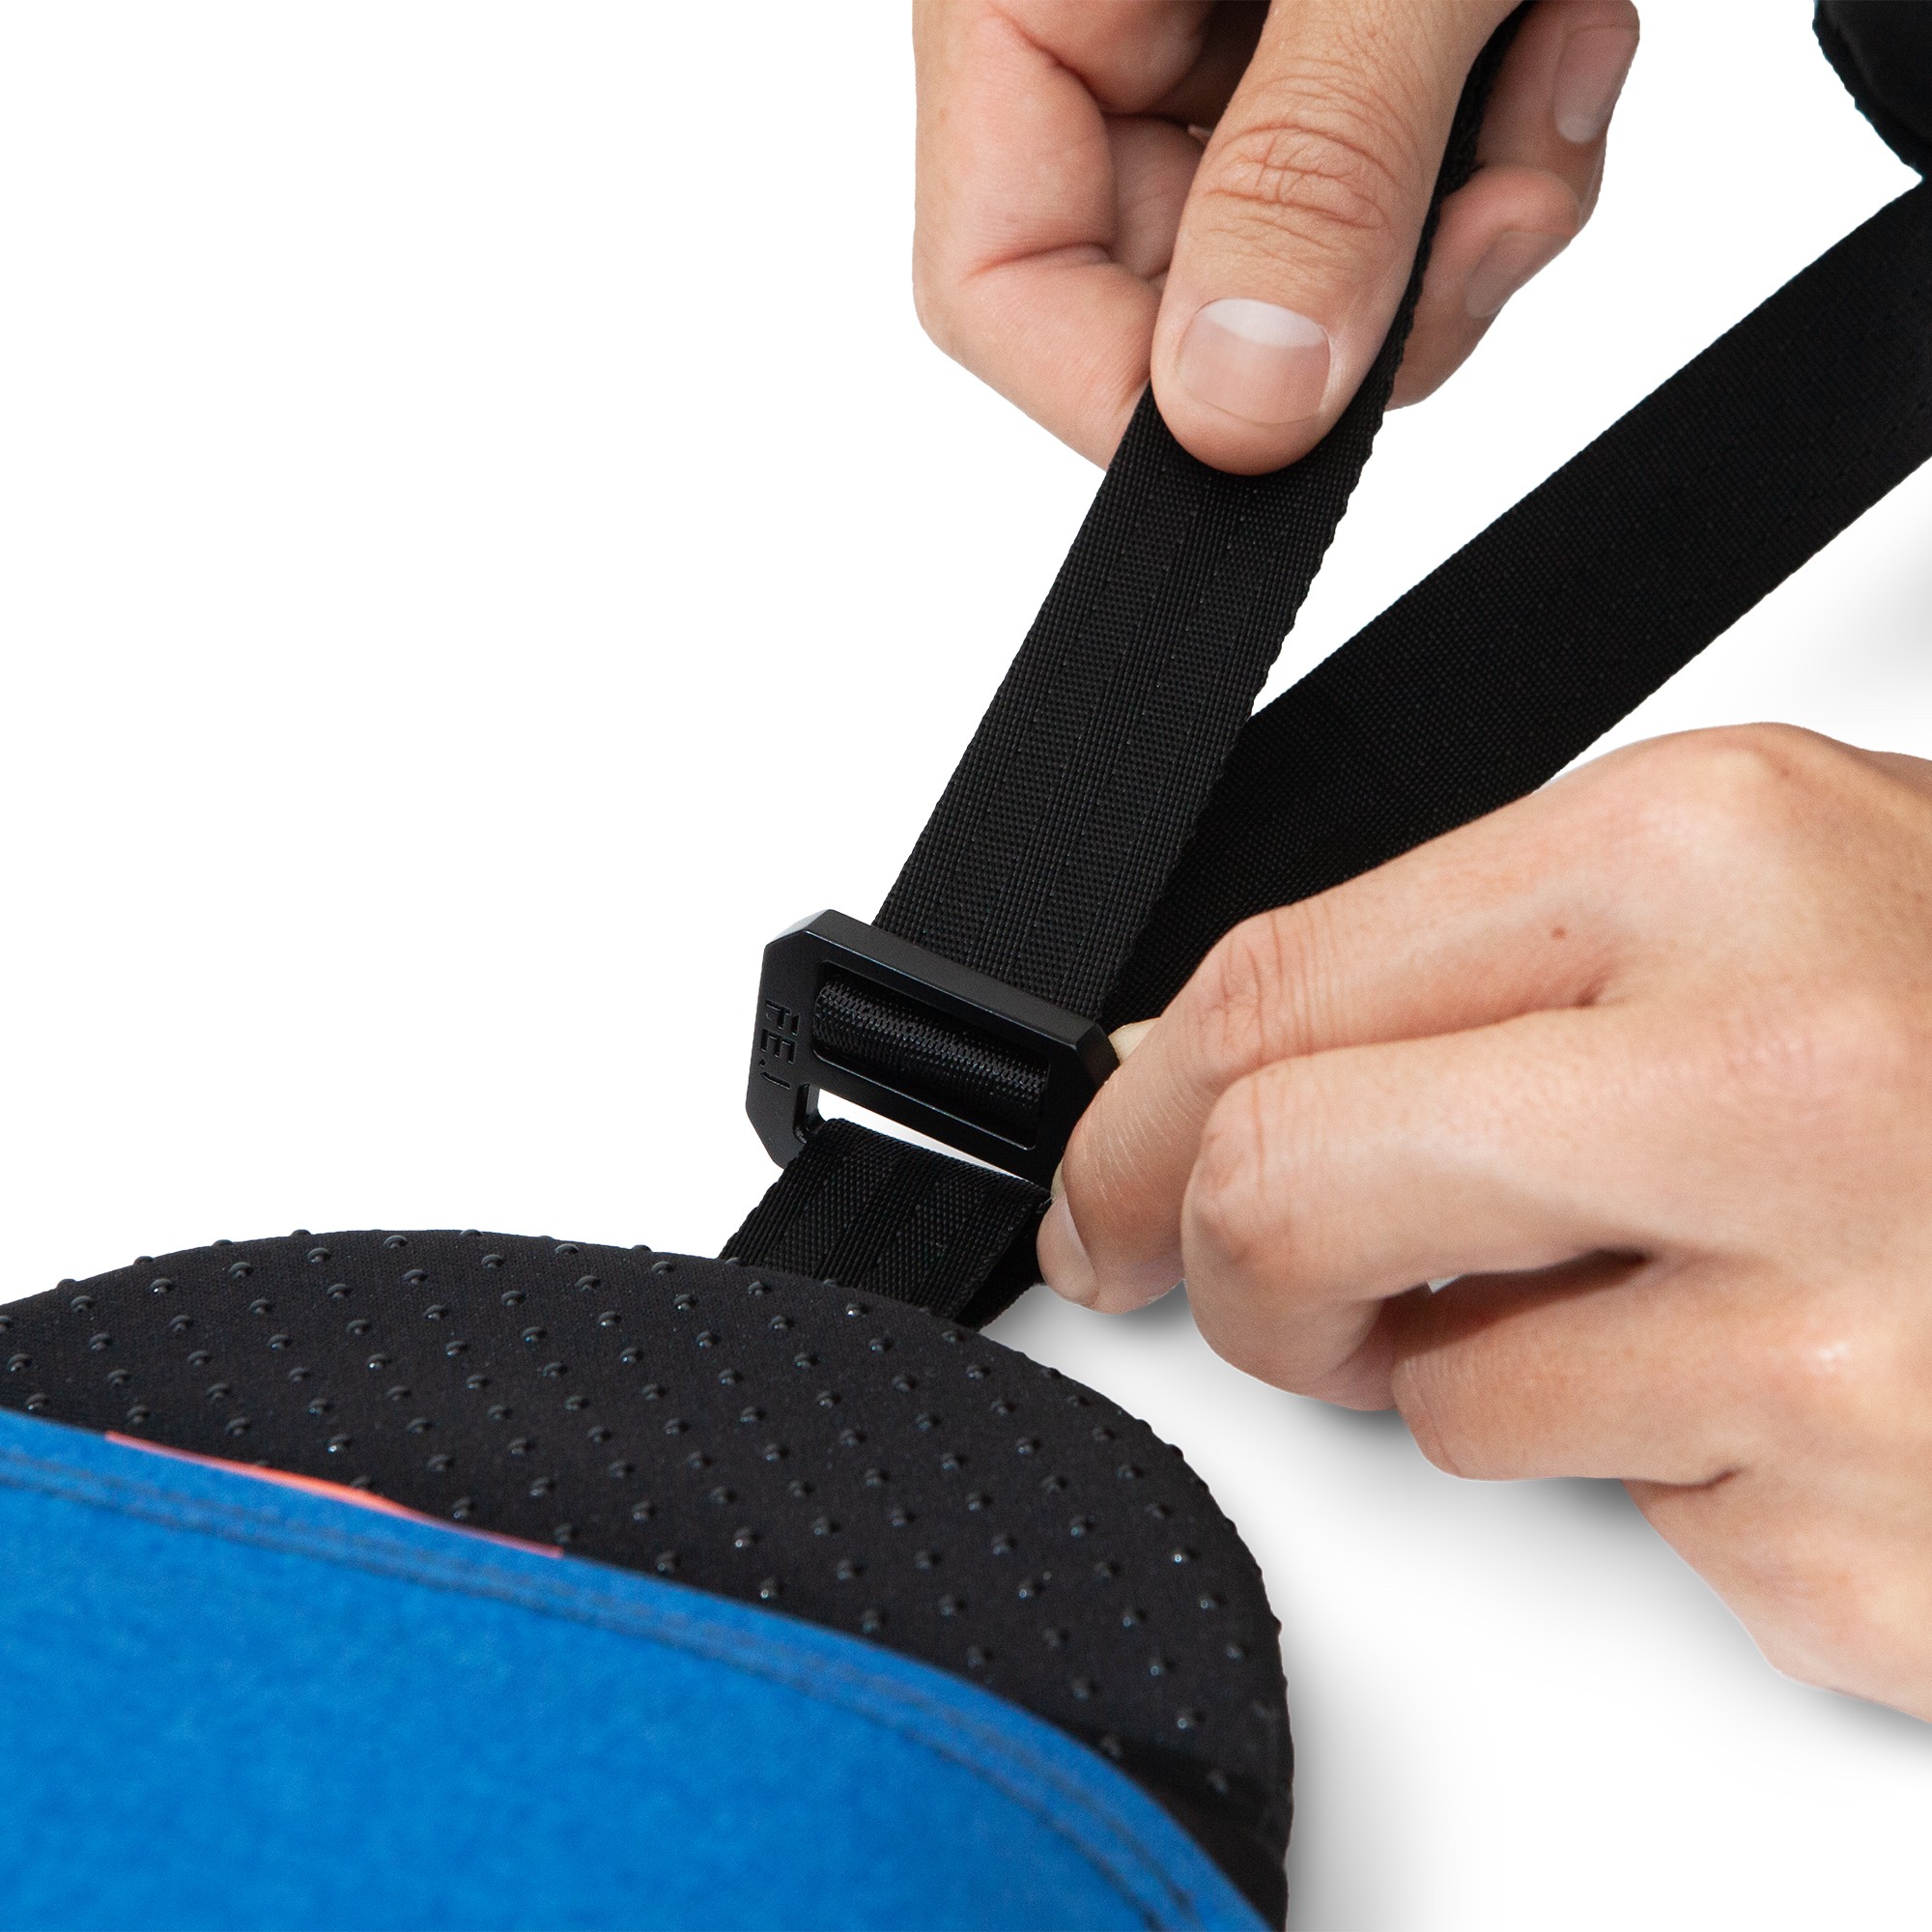 Two hands pulling on the strap and G-hook of a blue and black nap pillow designed for power napping.